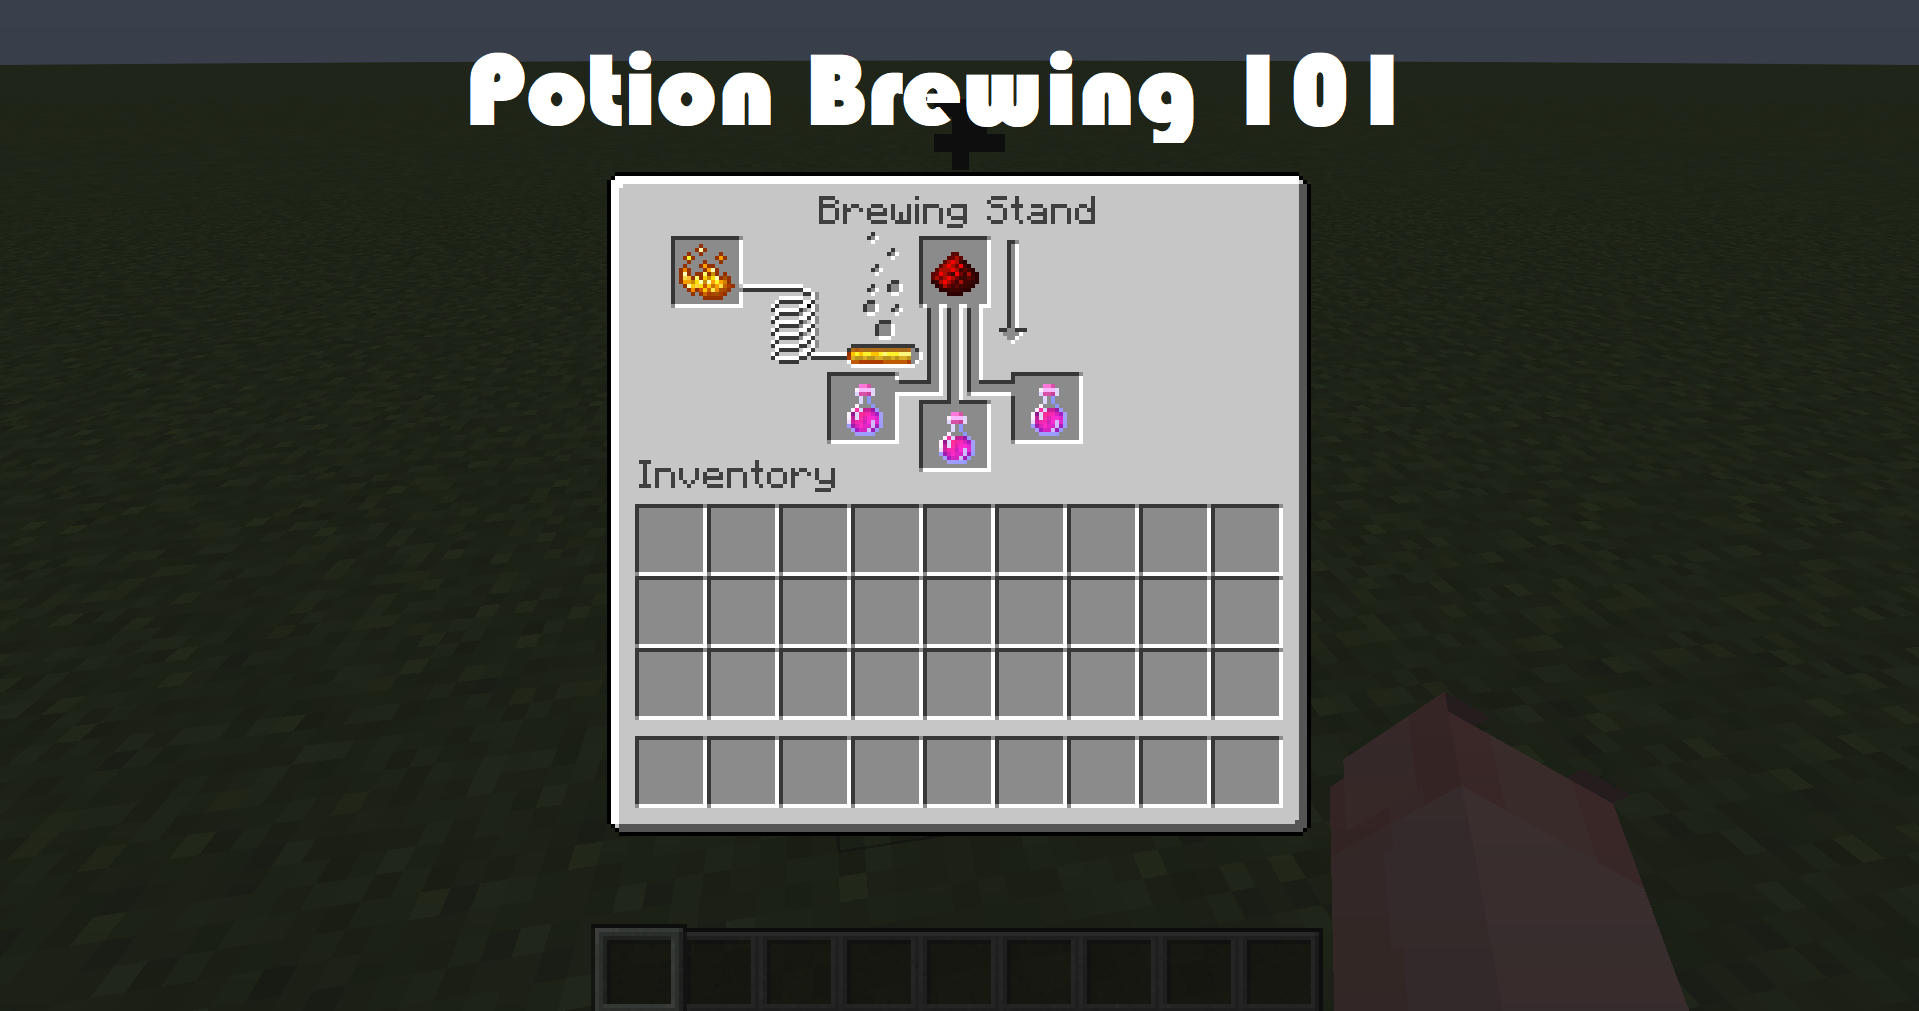 How To Brew Potions in Minecraft